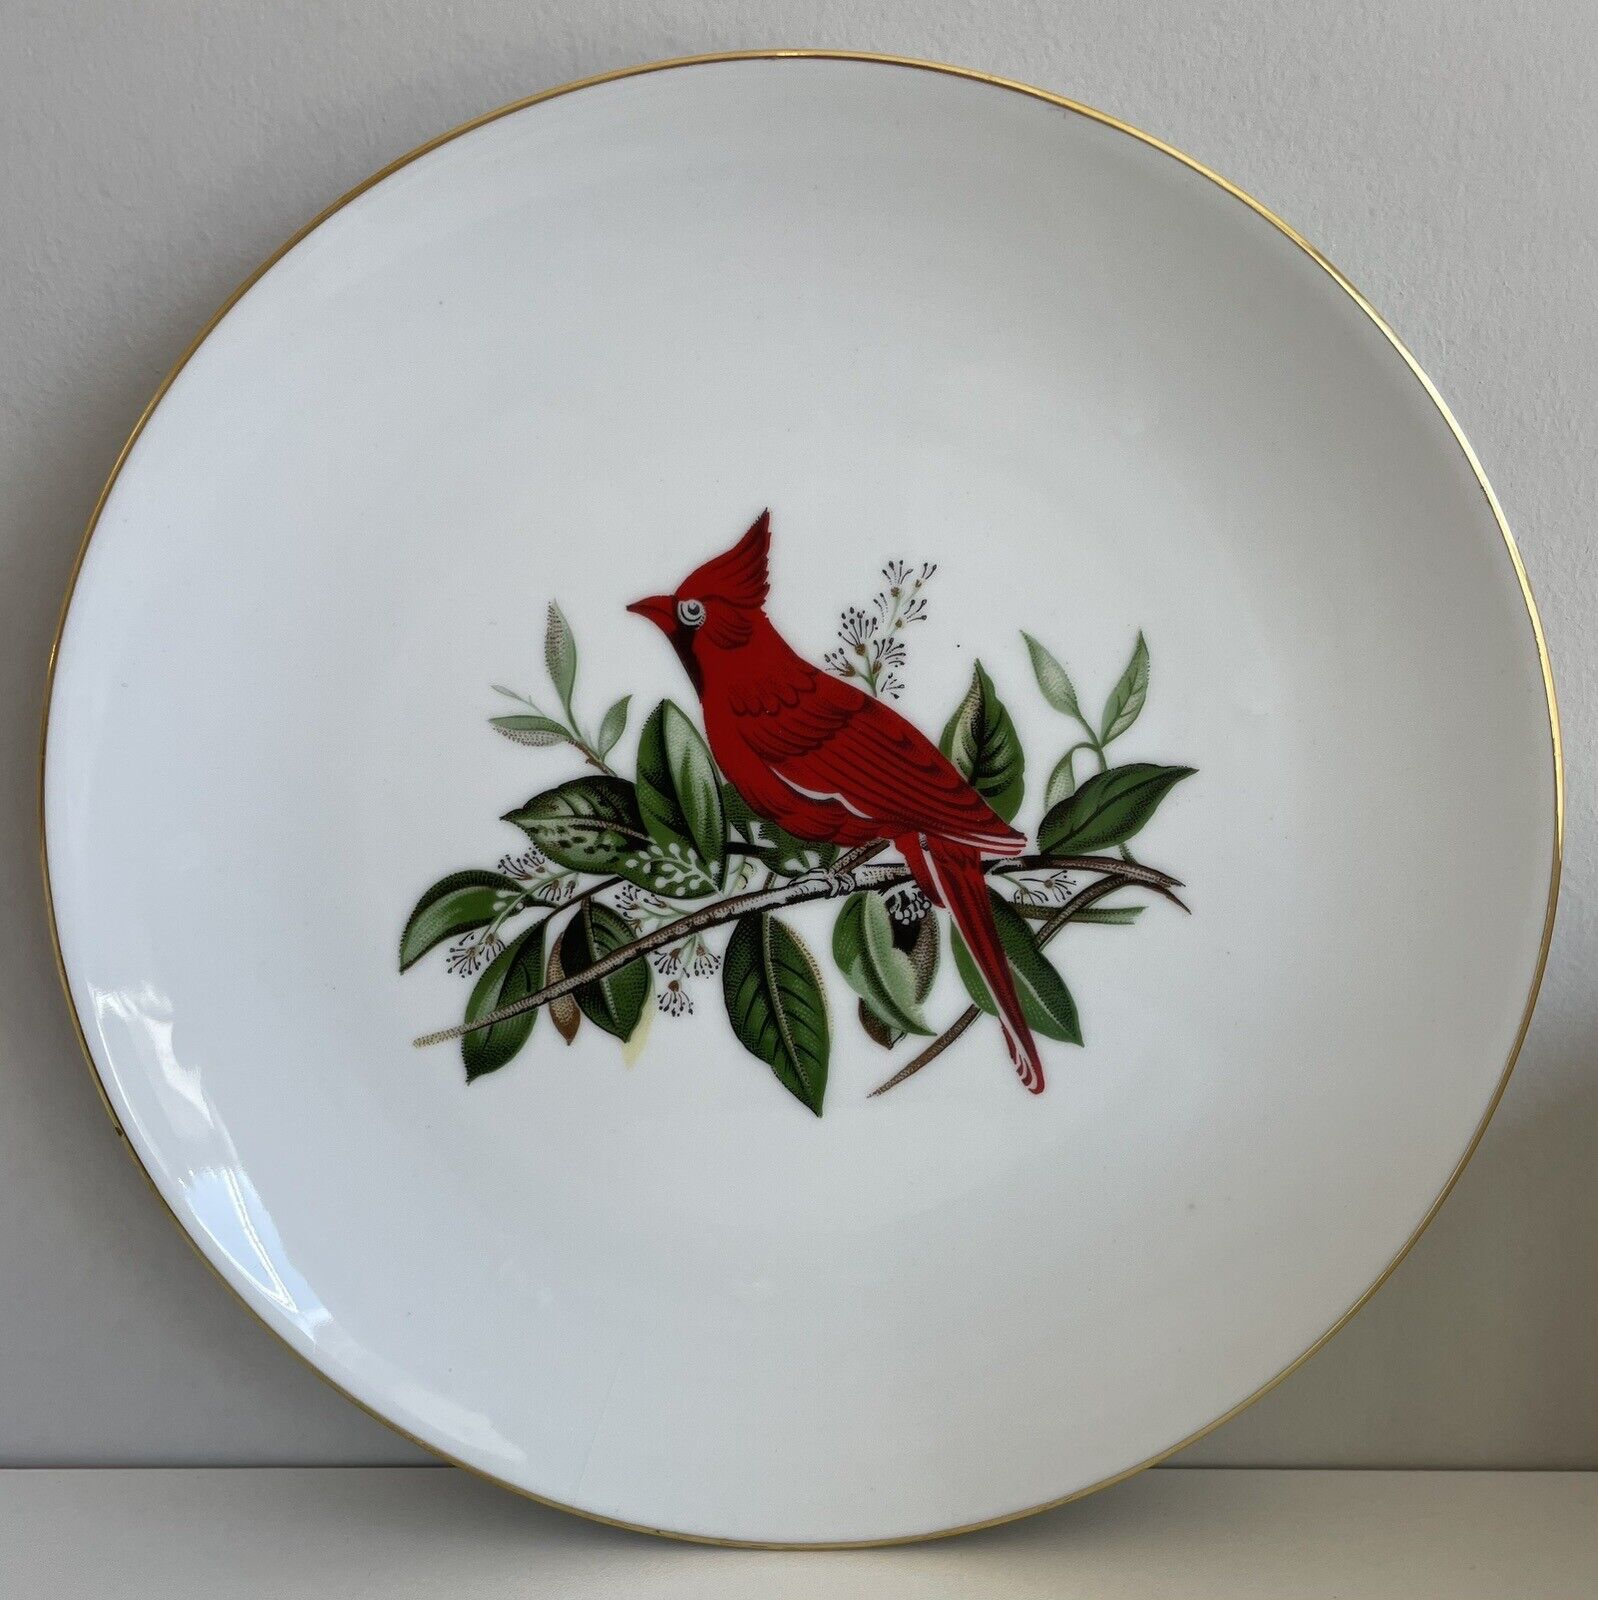 Cardinal Plate by Schumann Arzberg Germany 7.5 Inches Gold Colored Rim Red Bird